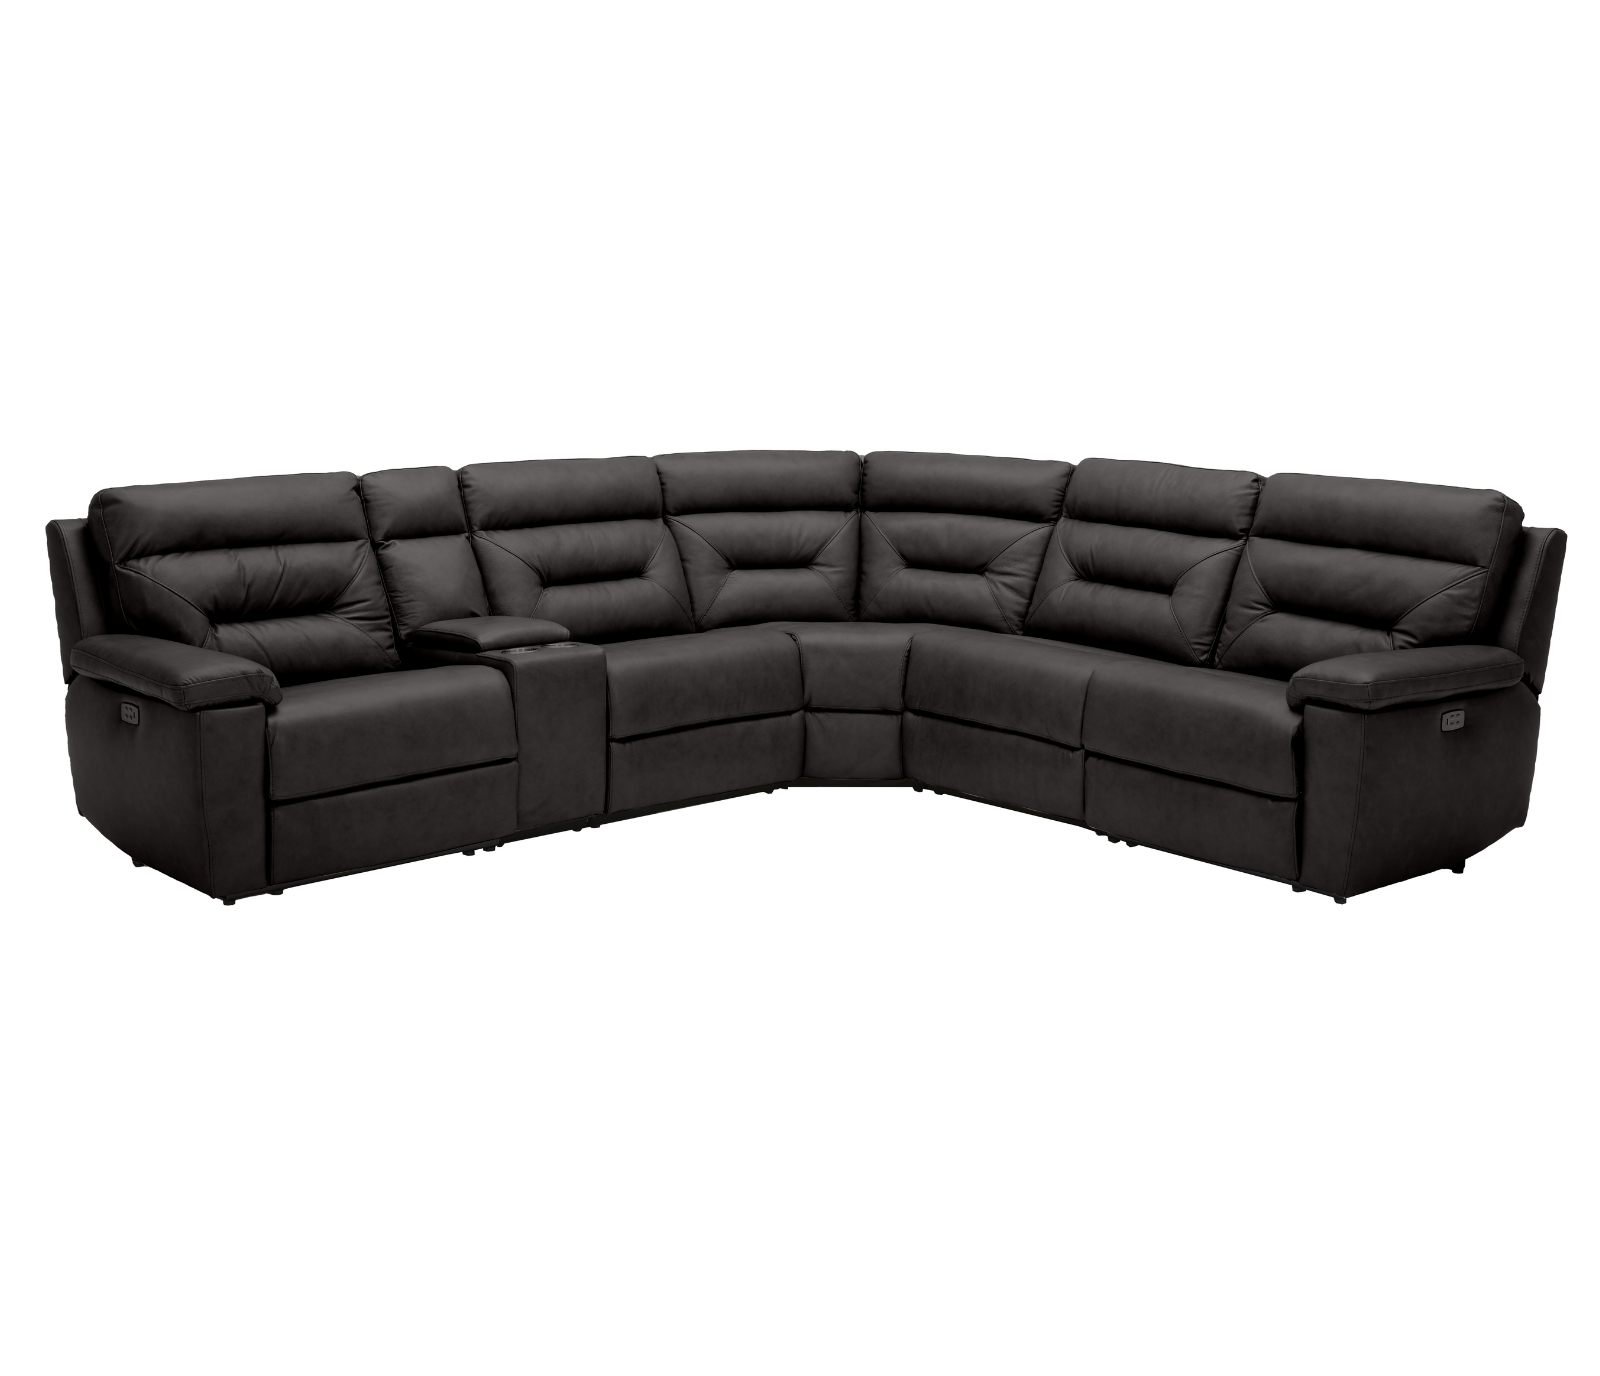 Nixon 6 Piece Power Reclining Sectional - Charcoal Grey Leather